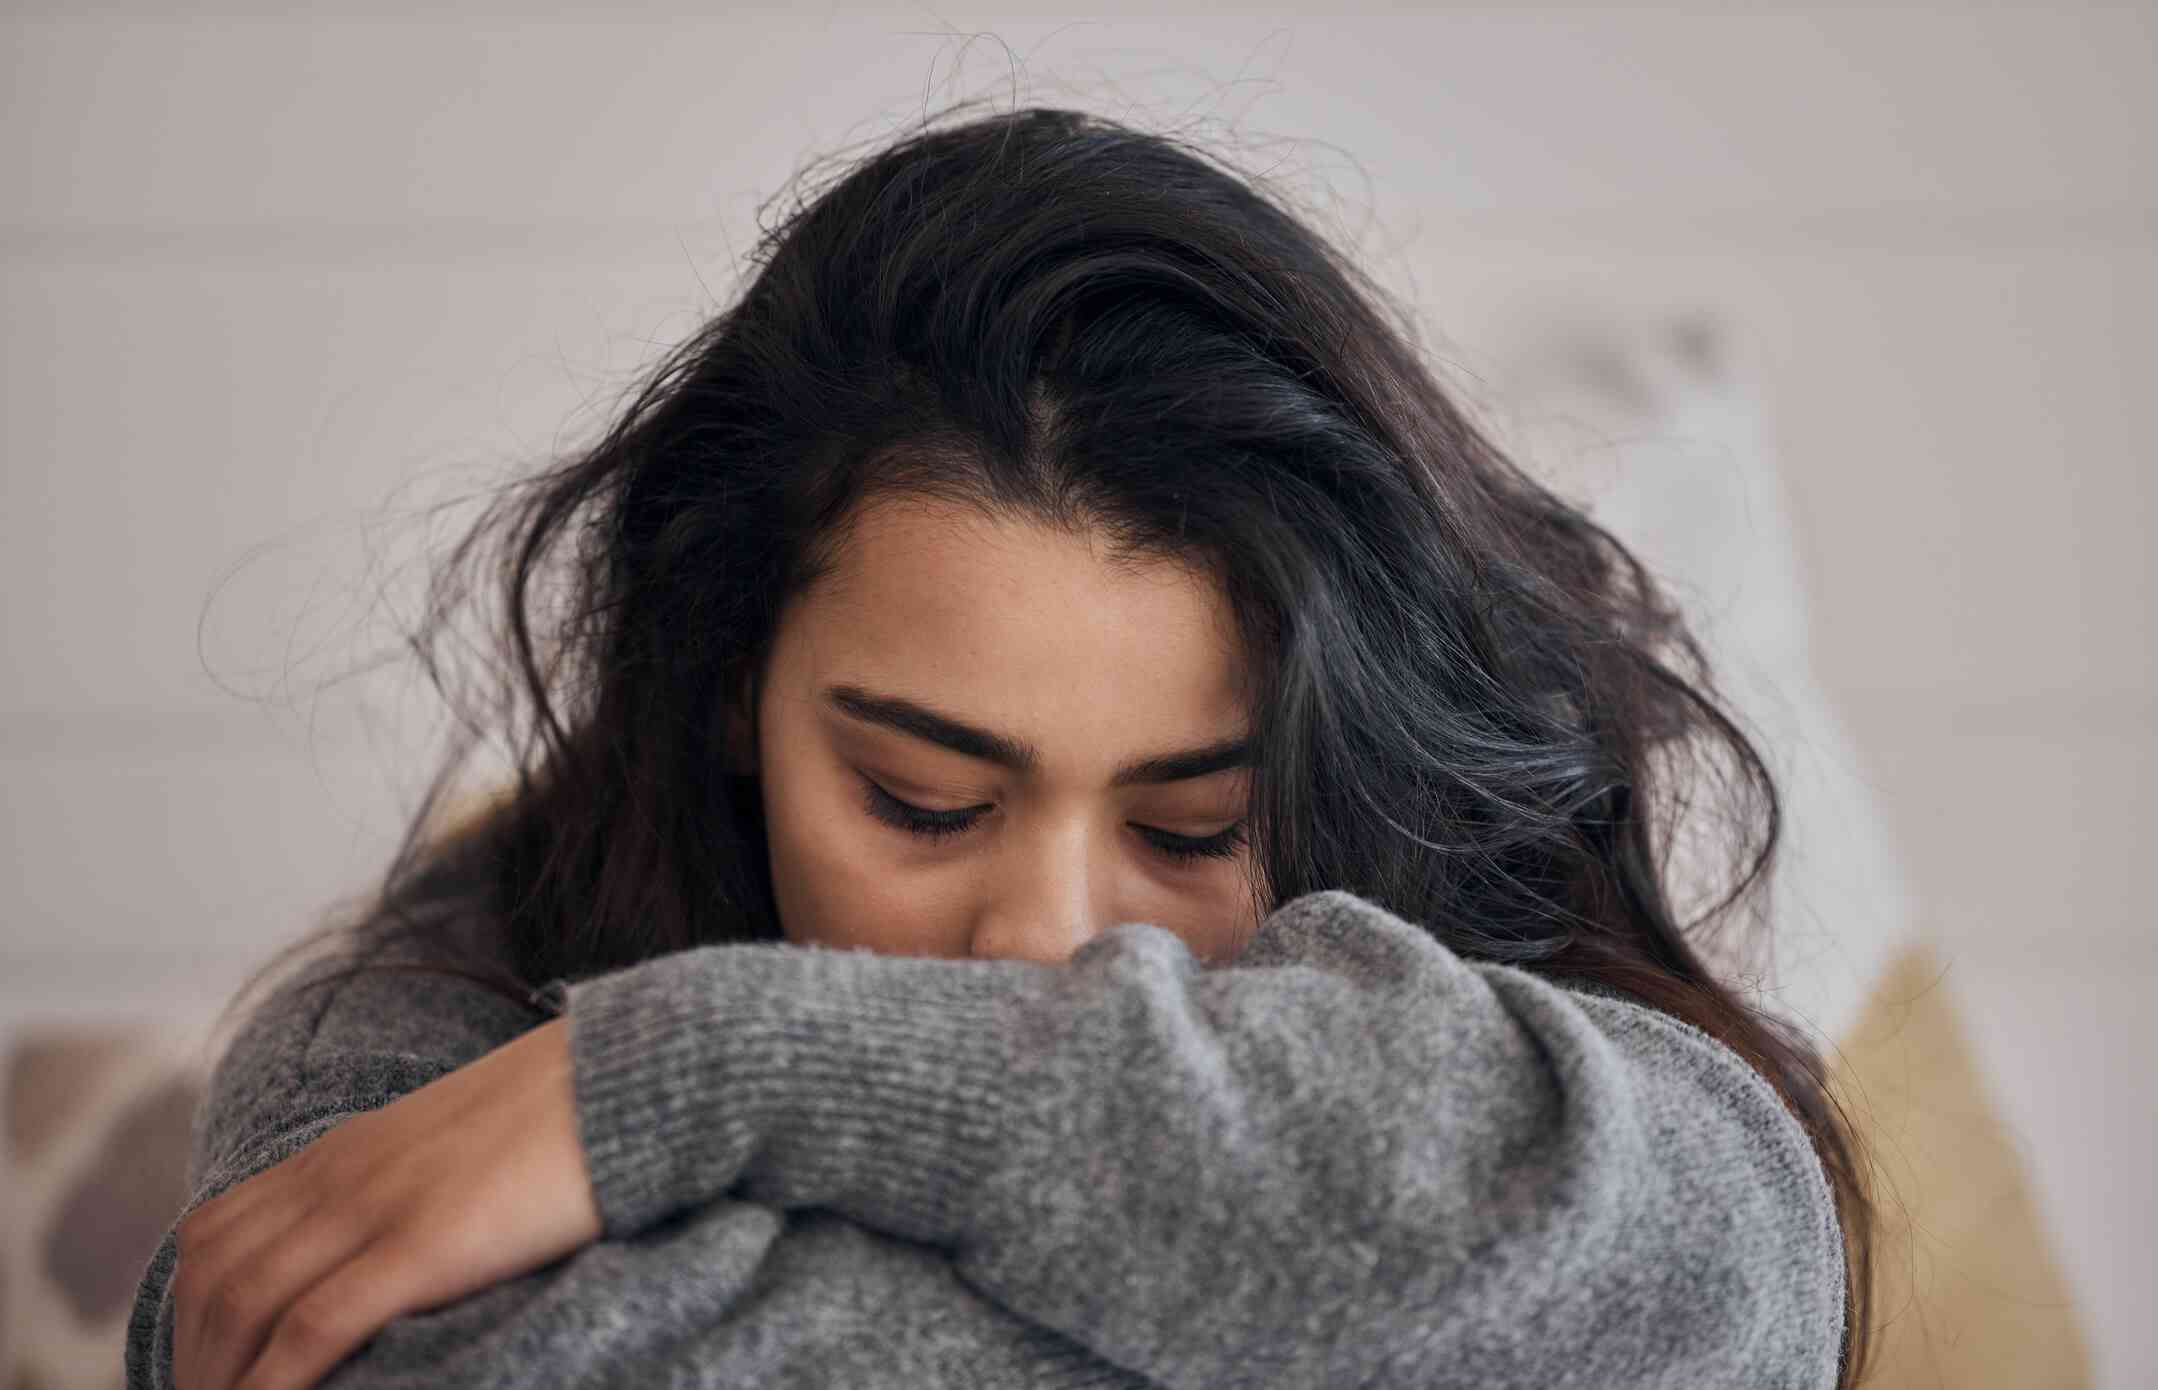 A woman in a grey sweater sadly closes her eyes and hides her face in her arms.